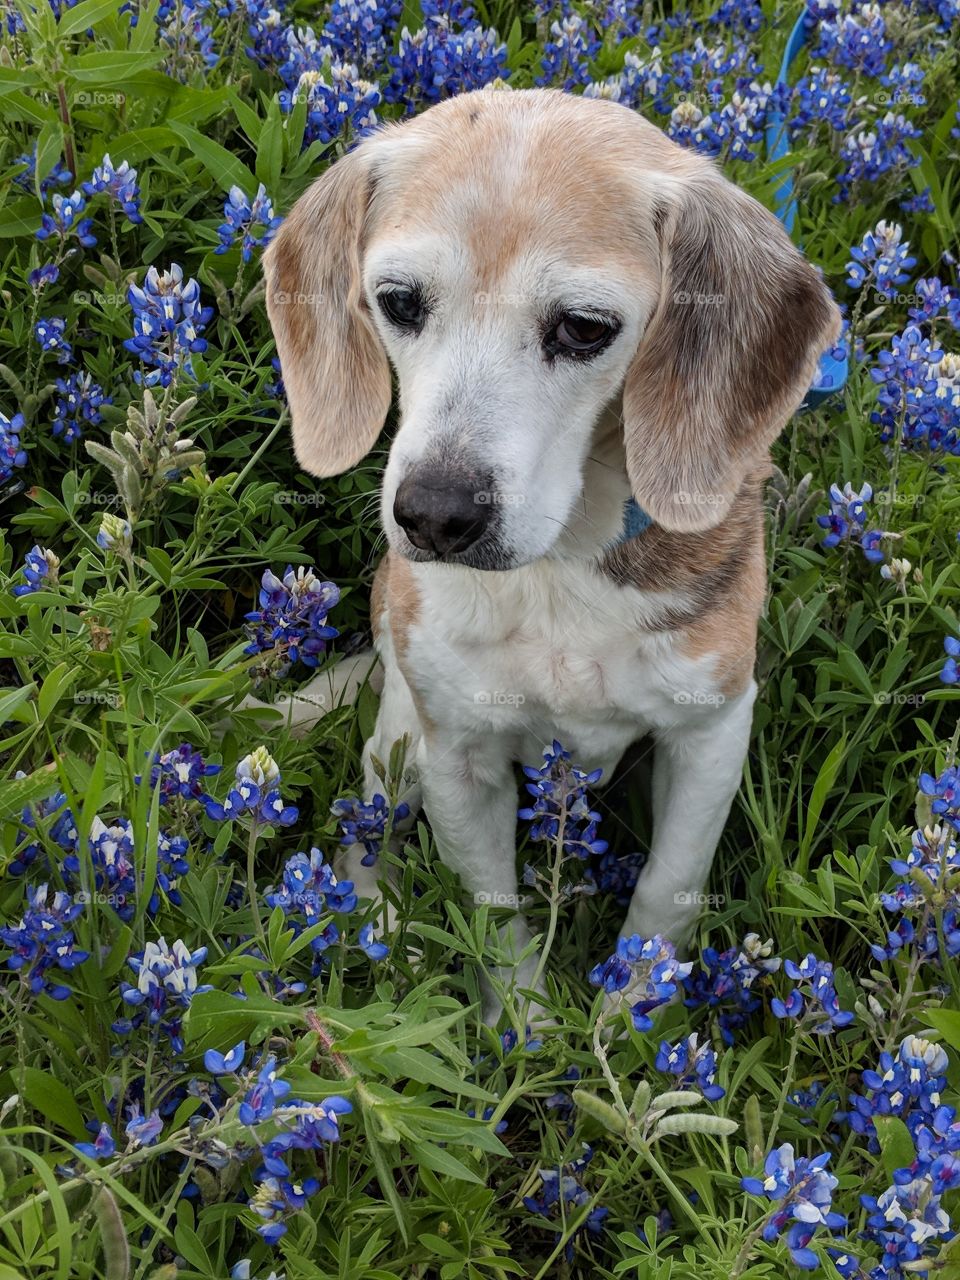 Sunny's time in the bluebonnets